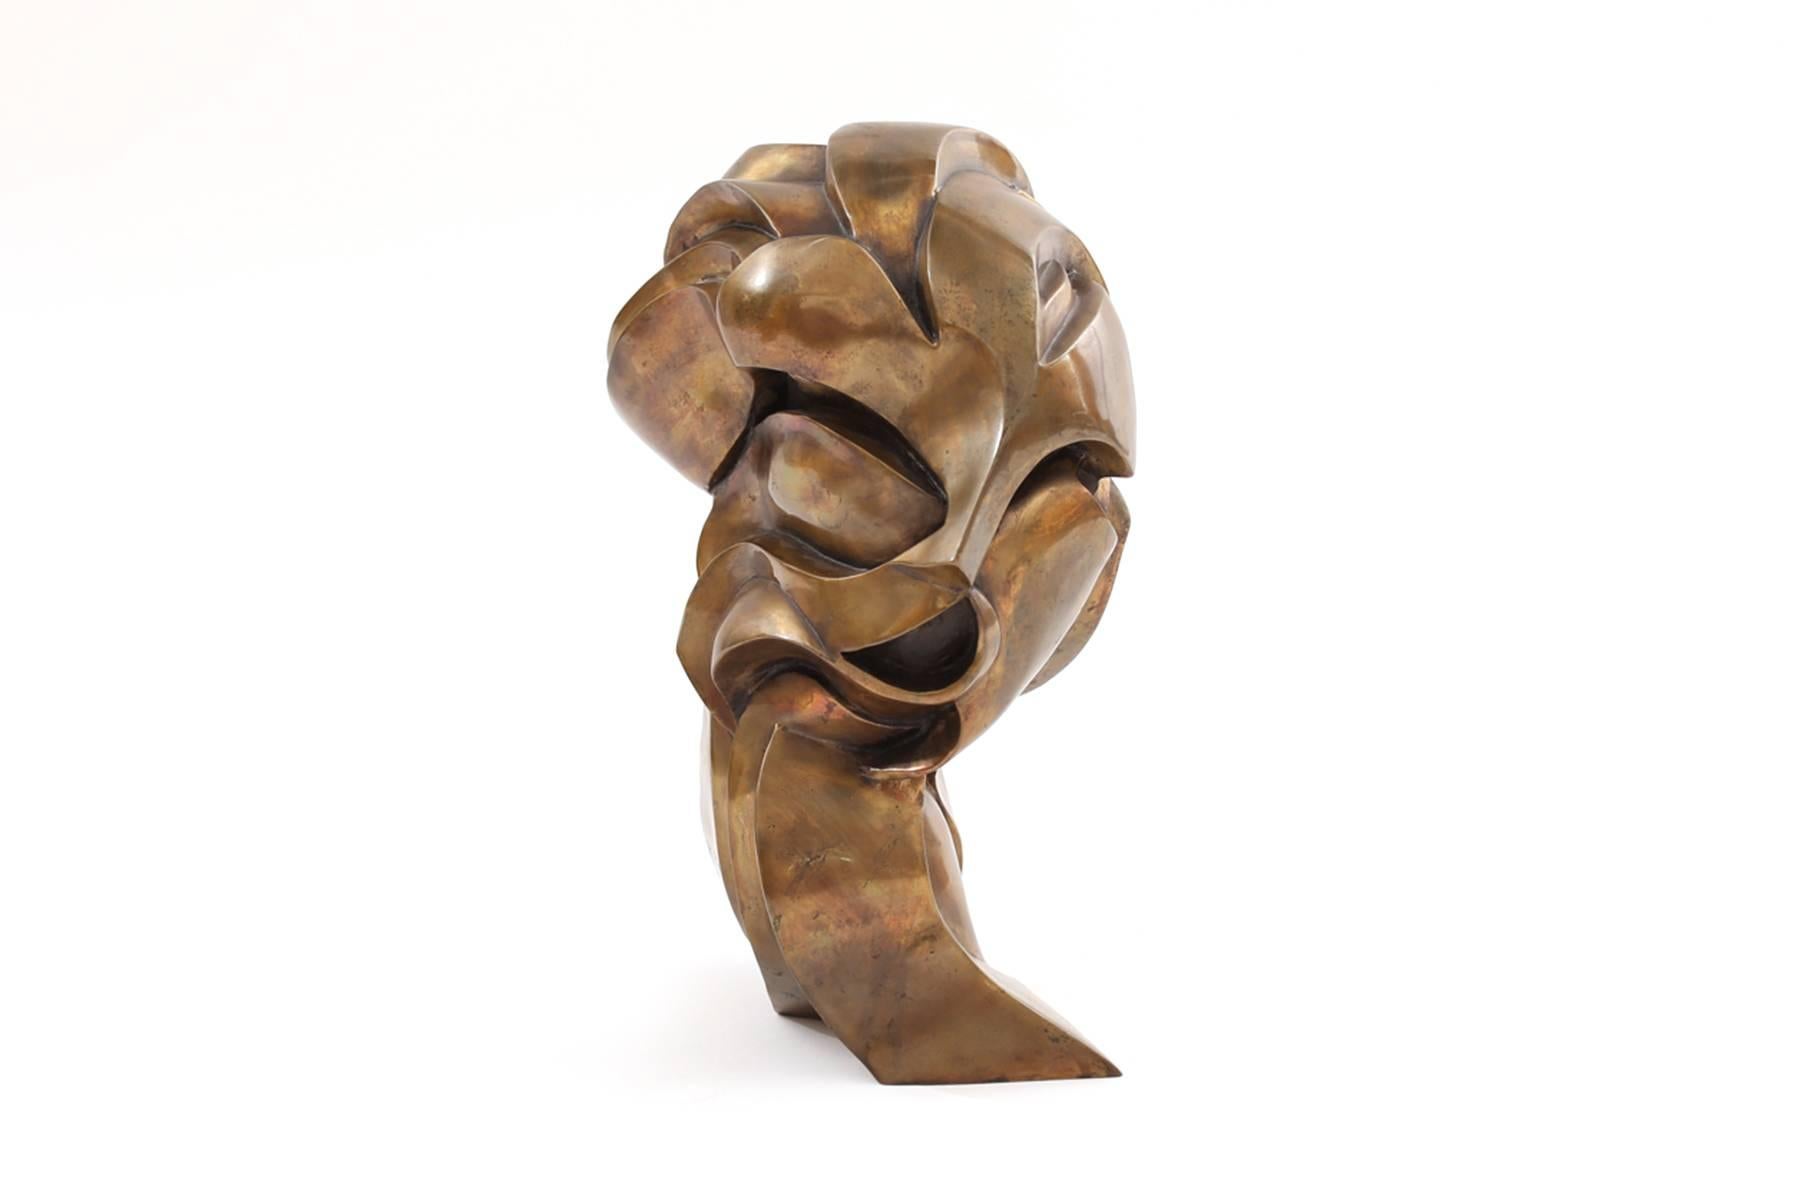 Robert Clark bronze sculpture, circa late 1970s. Clark, more notably known for his costume jewelry also was quite an accomplished and exhibited sculptor. He teamed with William De Lillo to create their haute couture jewelry house of William De Lillo